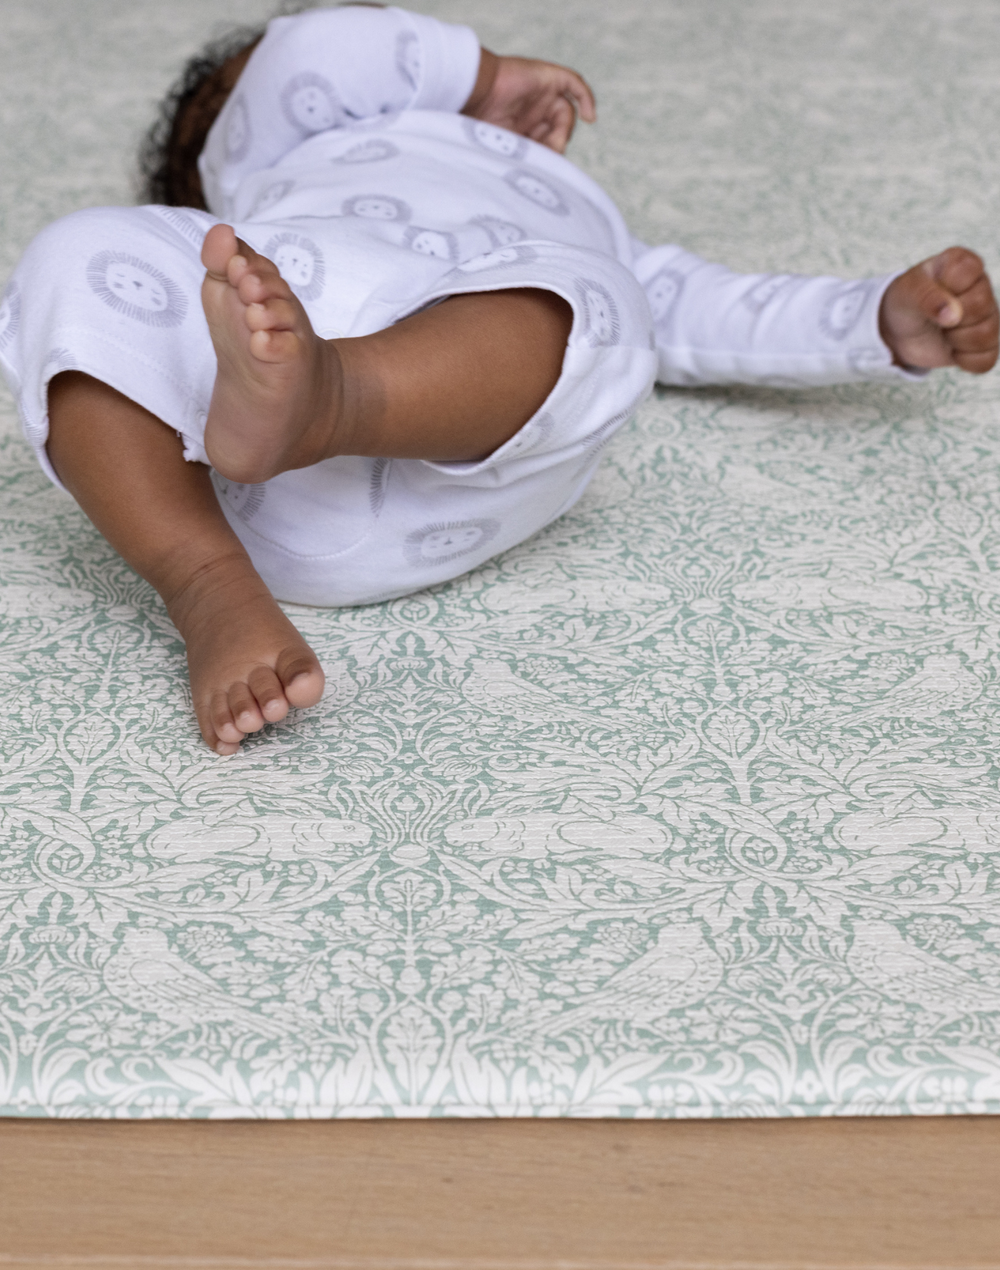 totter + tumble brer rabbit play mat in morris & co design with baby laying on top, playing, rolling on supportive safe non toxic floor mat in padded memory foam to support and protect